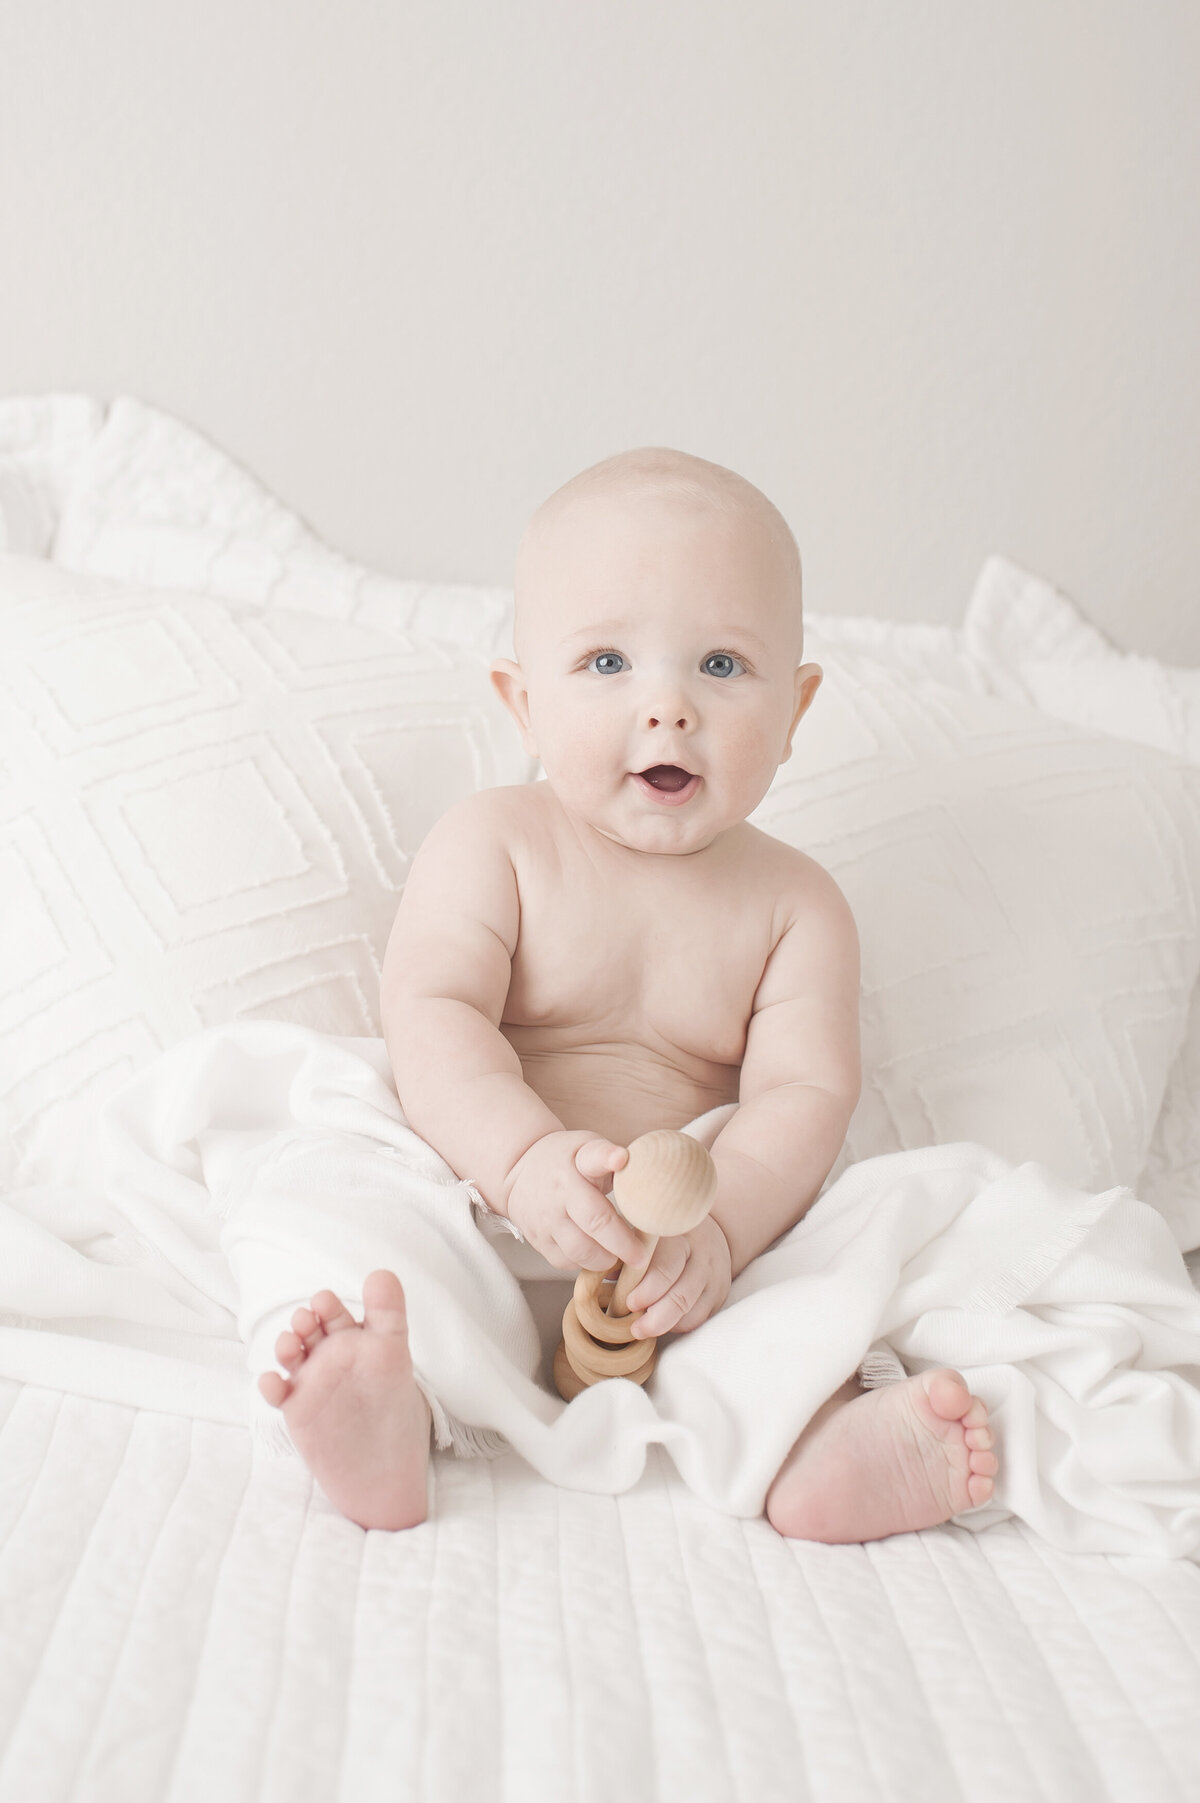 six month old baby sitting on white baby with wooden toy